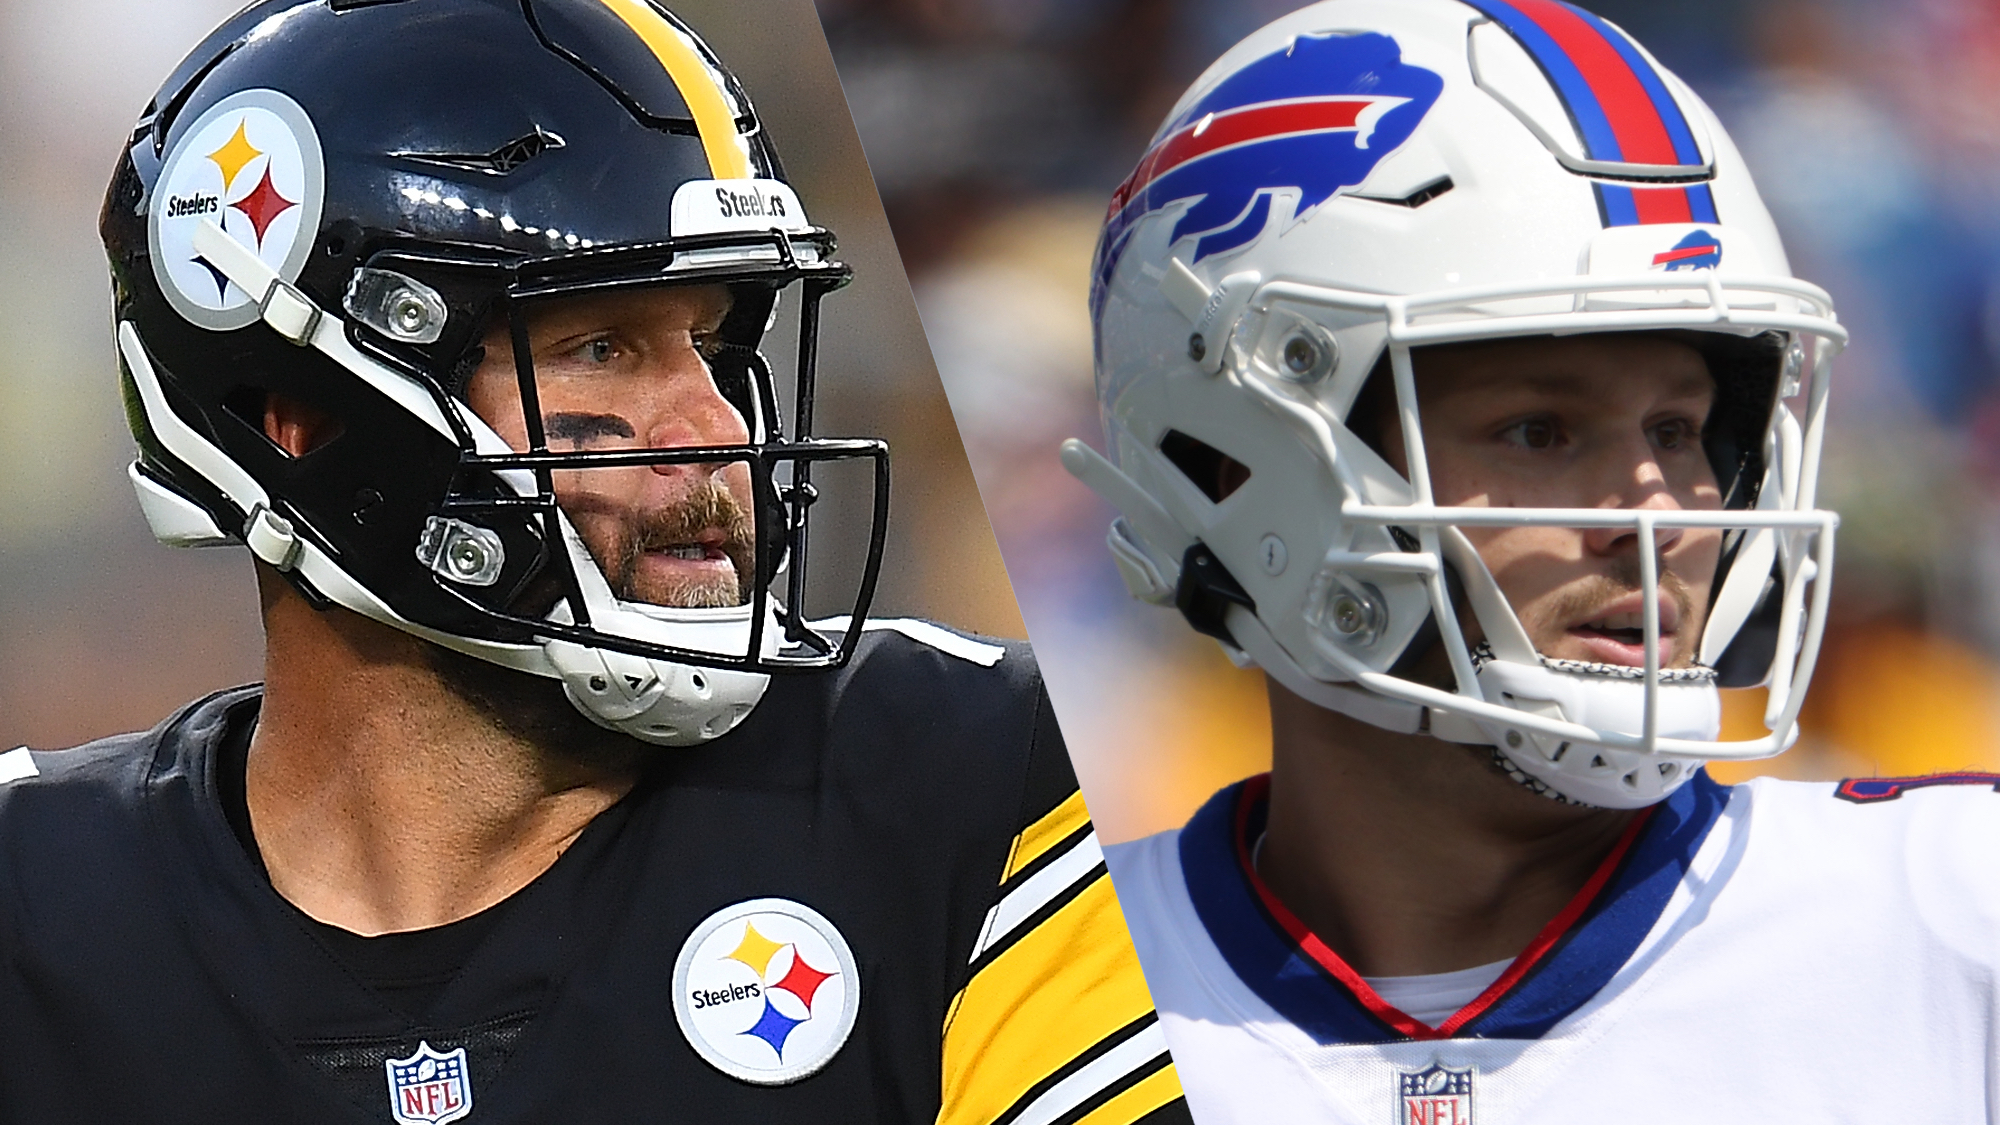 Bills vs. Steelers live stream: TV channel, how to watch